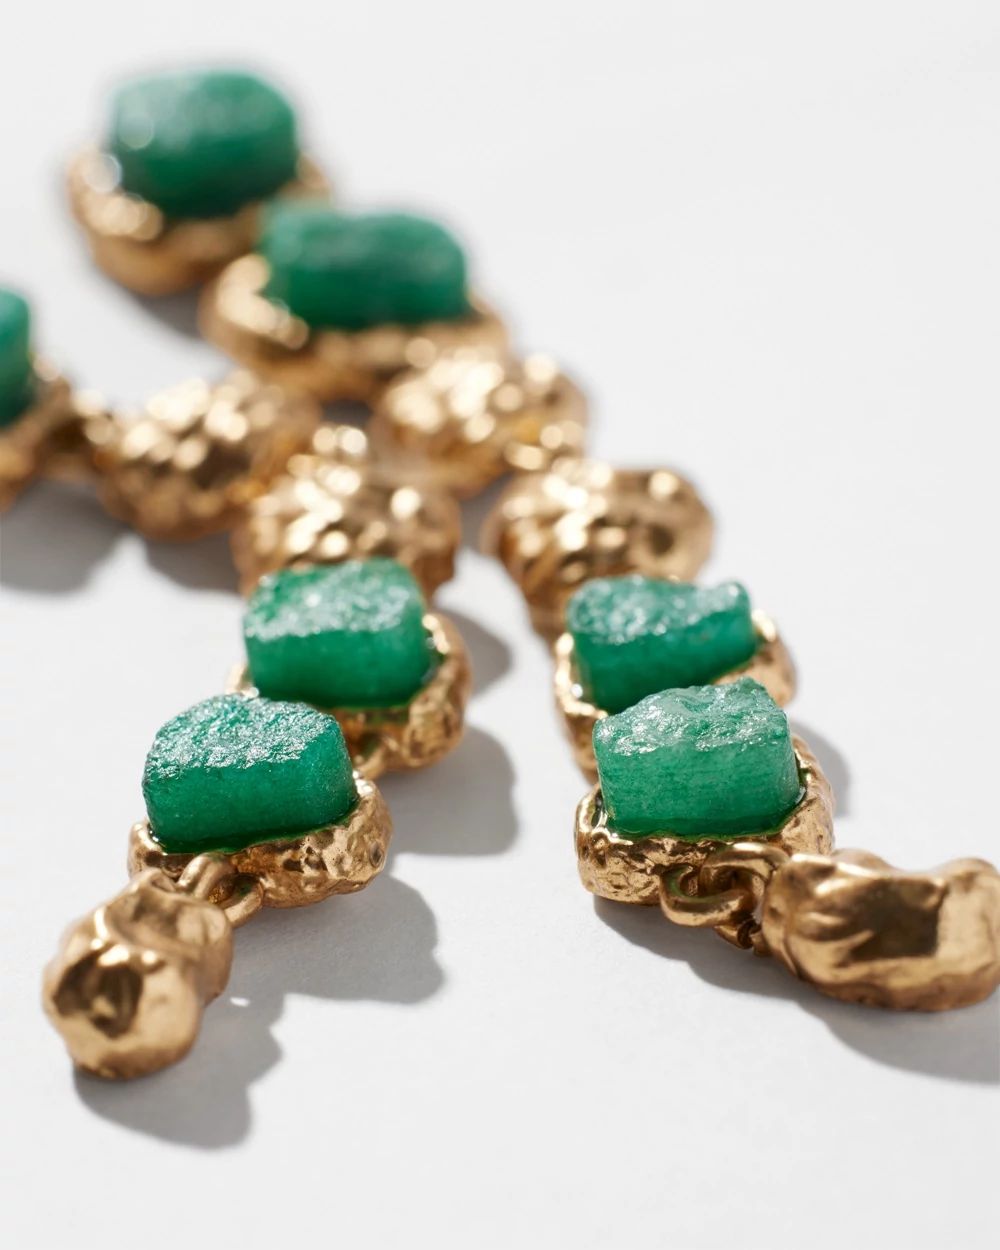 Goldtone + Green Stone Linear Earrings click to view larger image.